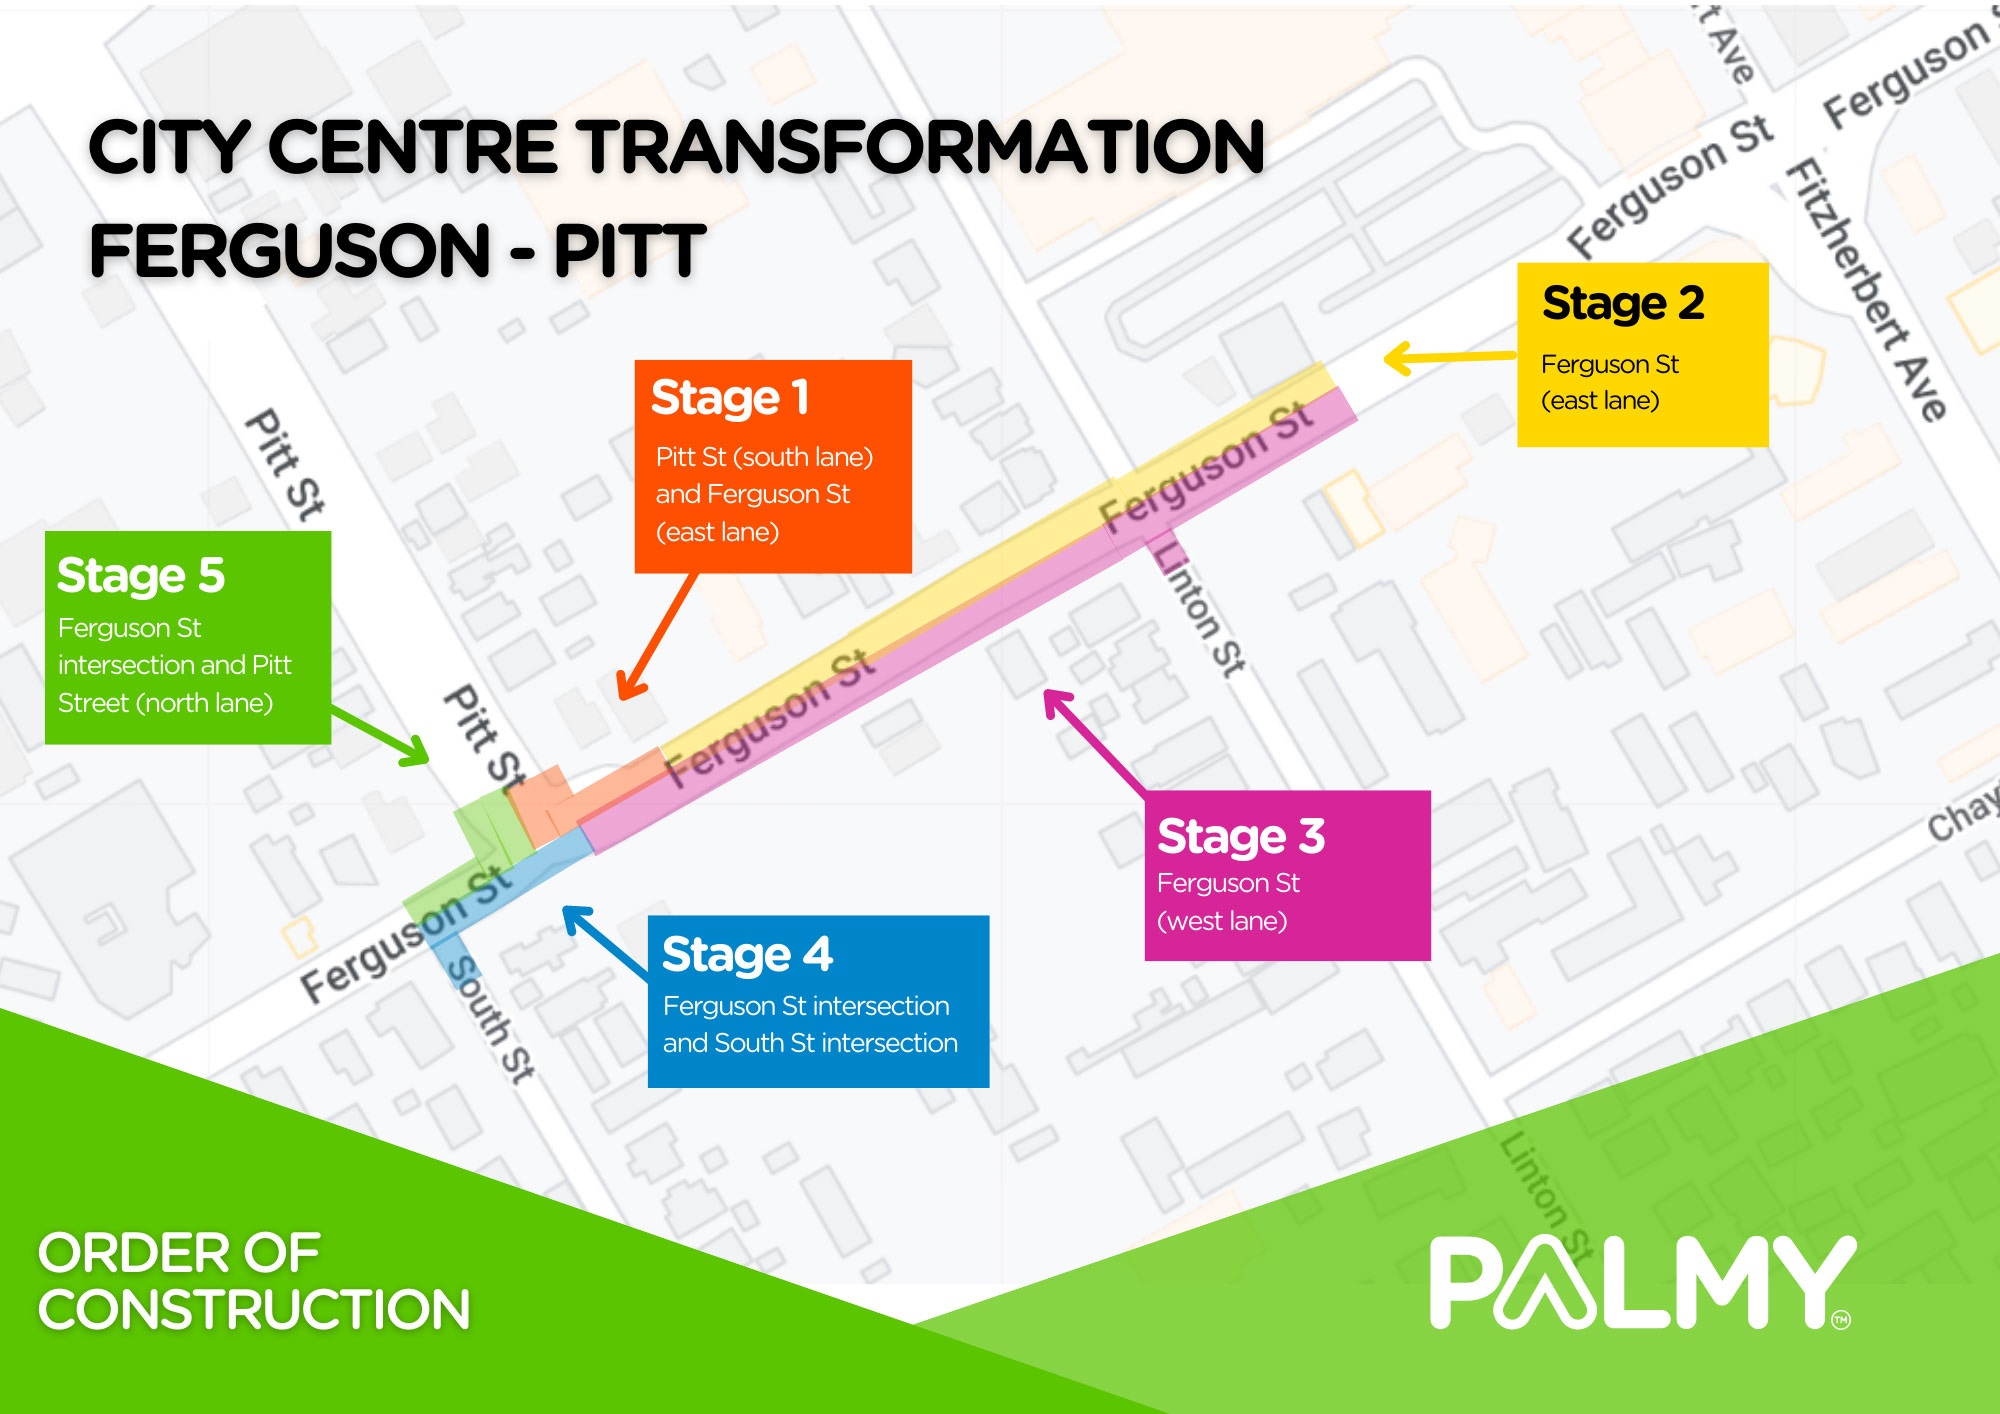 Map indicates the stages of transformation at Ferguson and Pitt streets